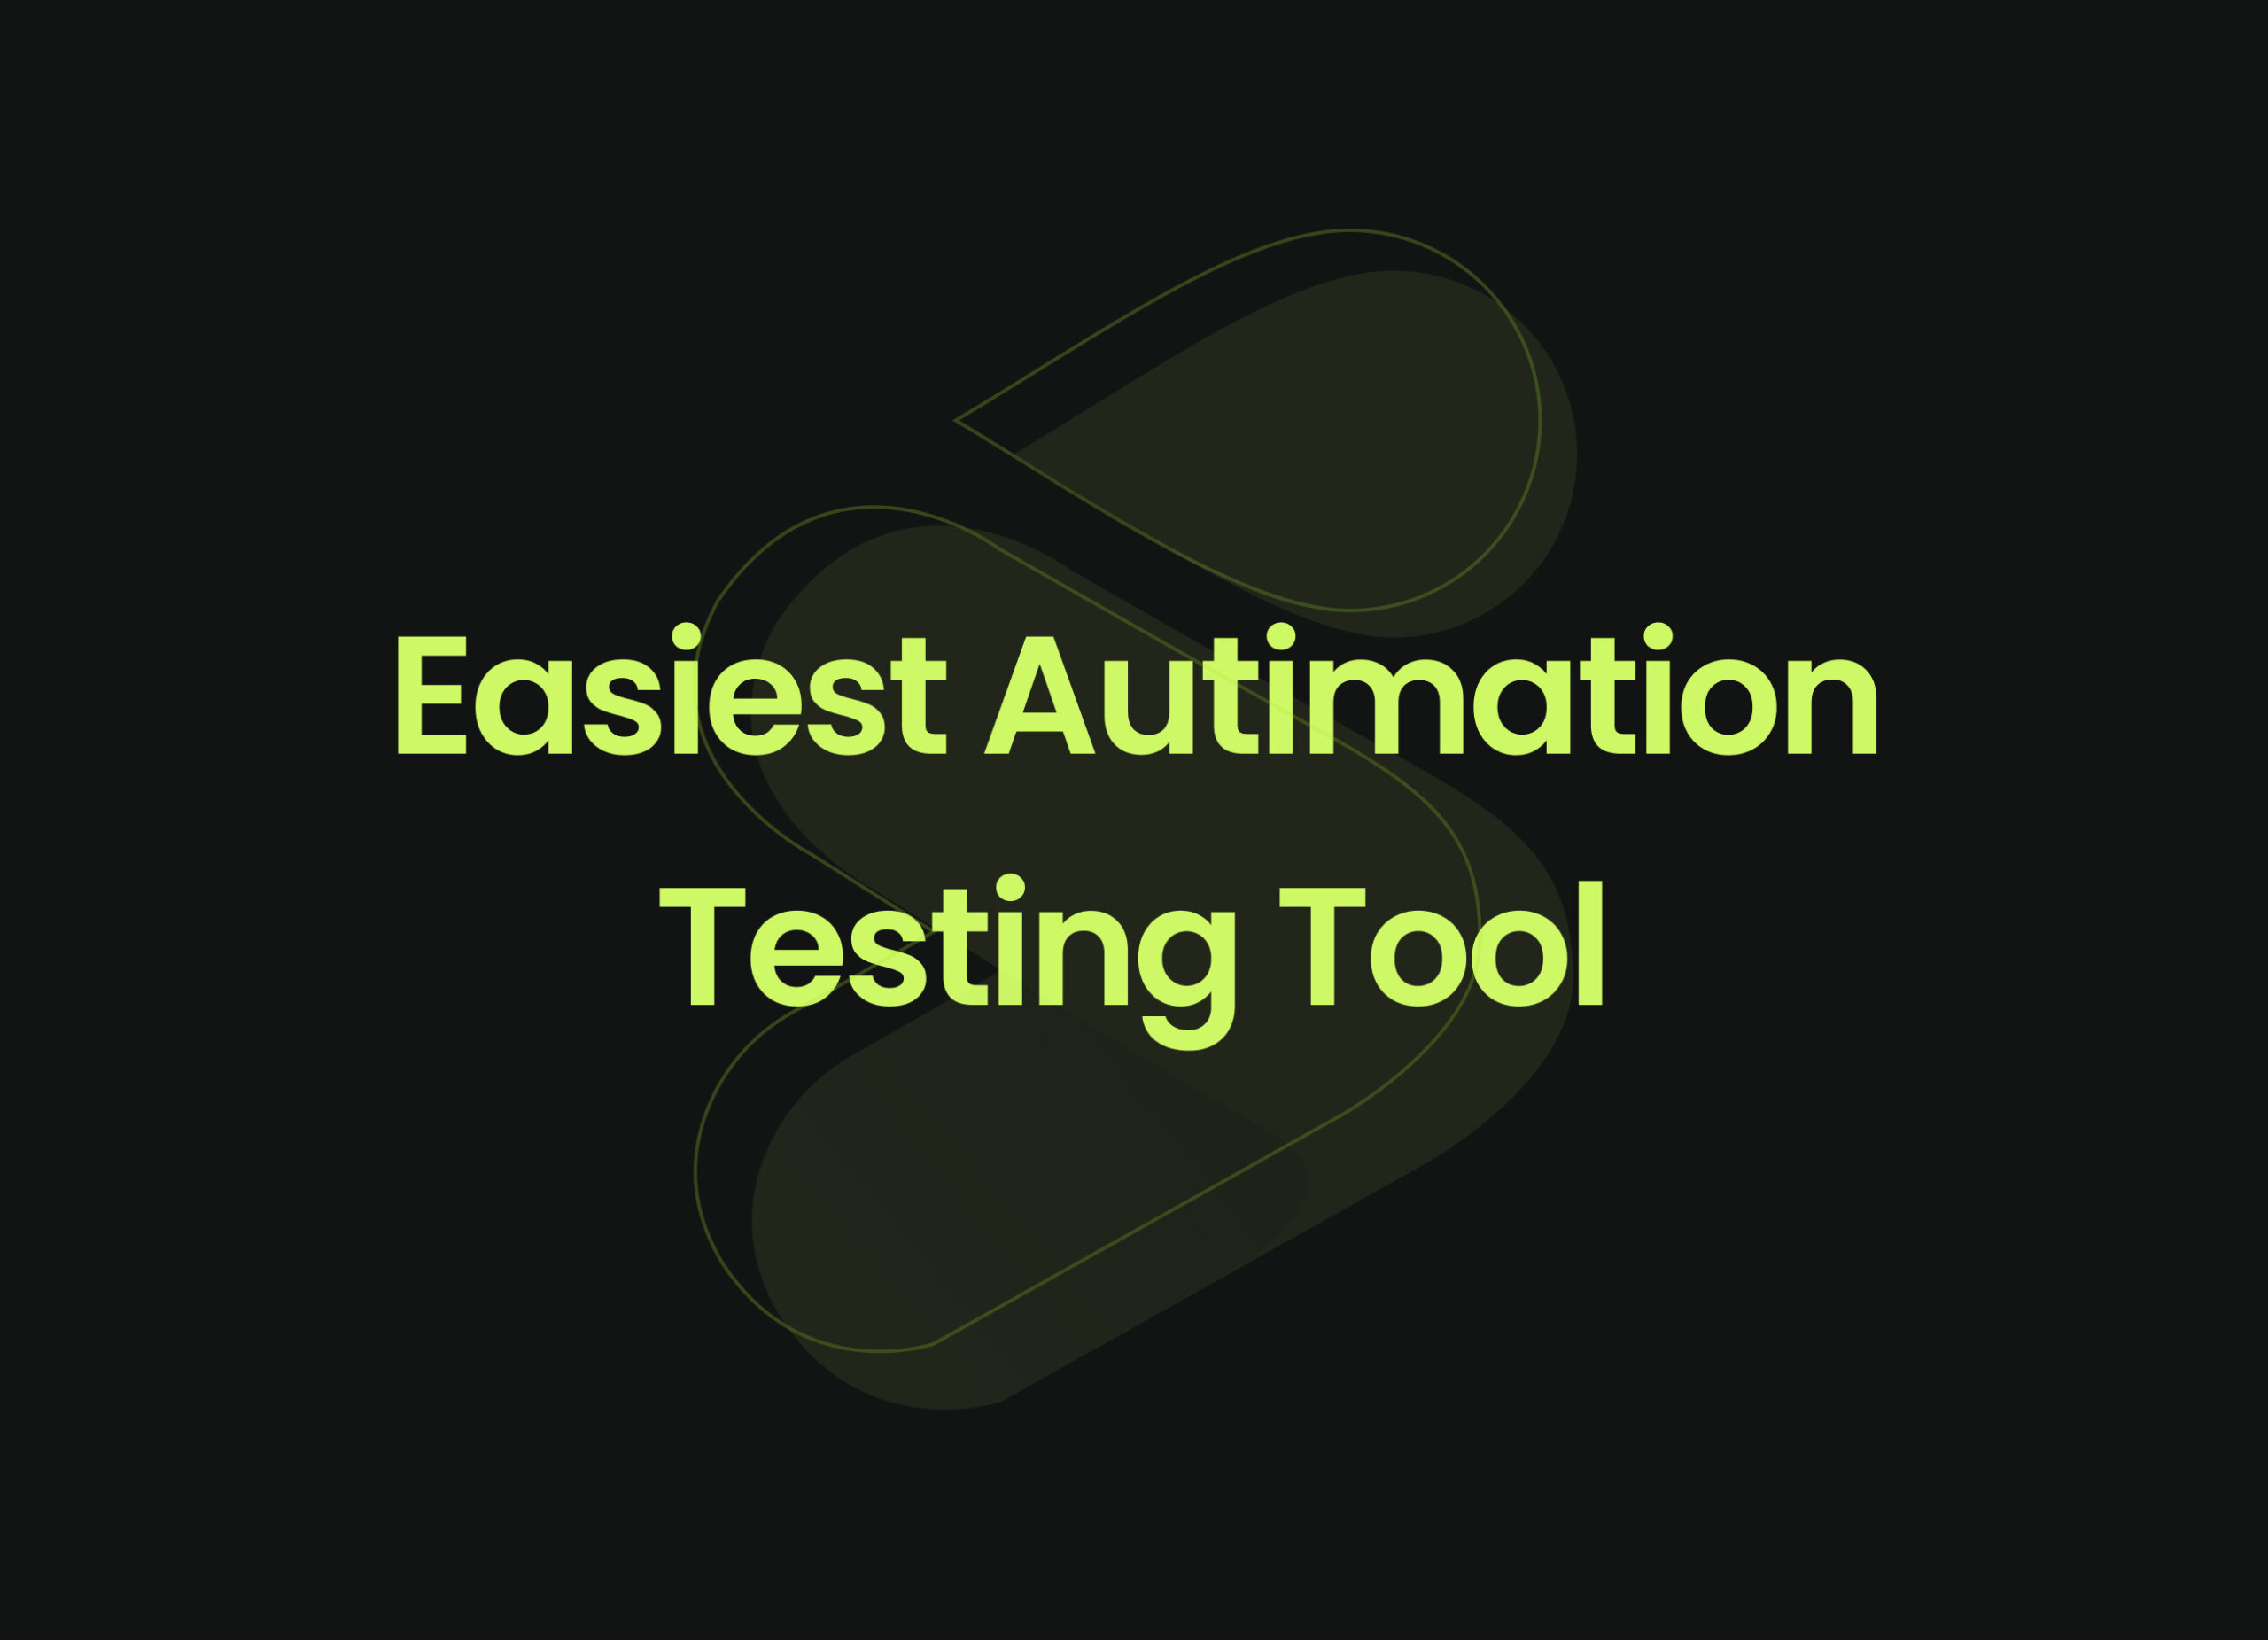 Easiest Automation Testing Tool